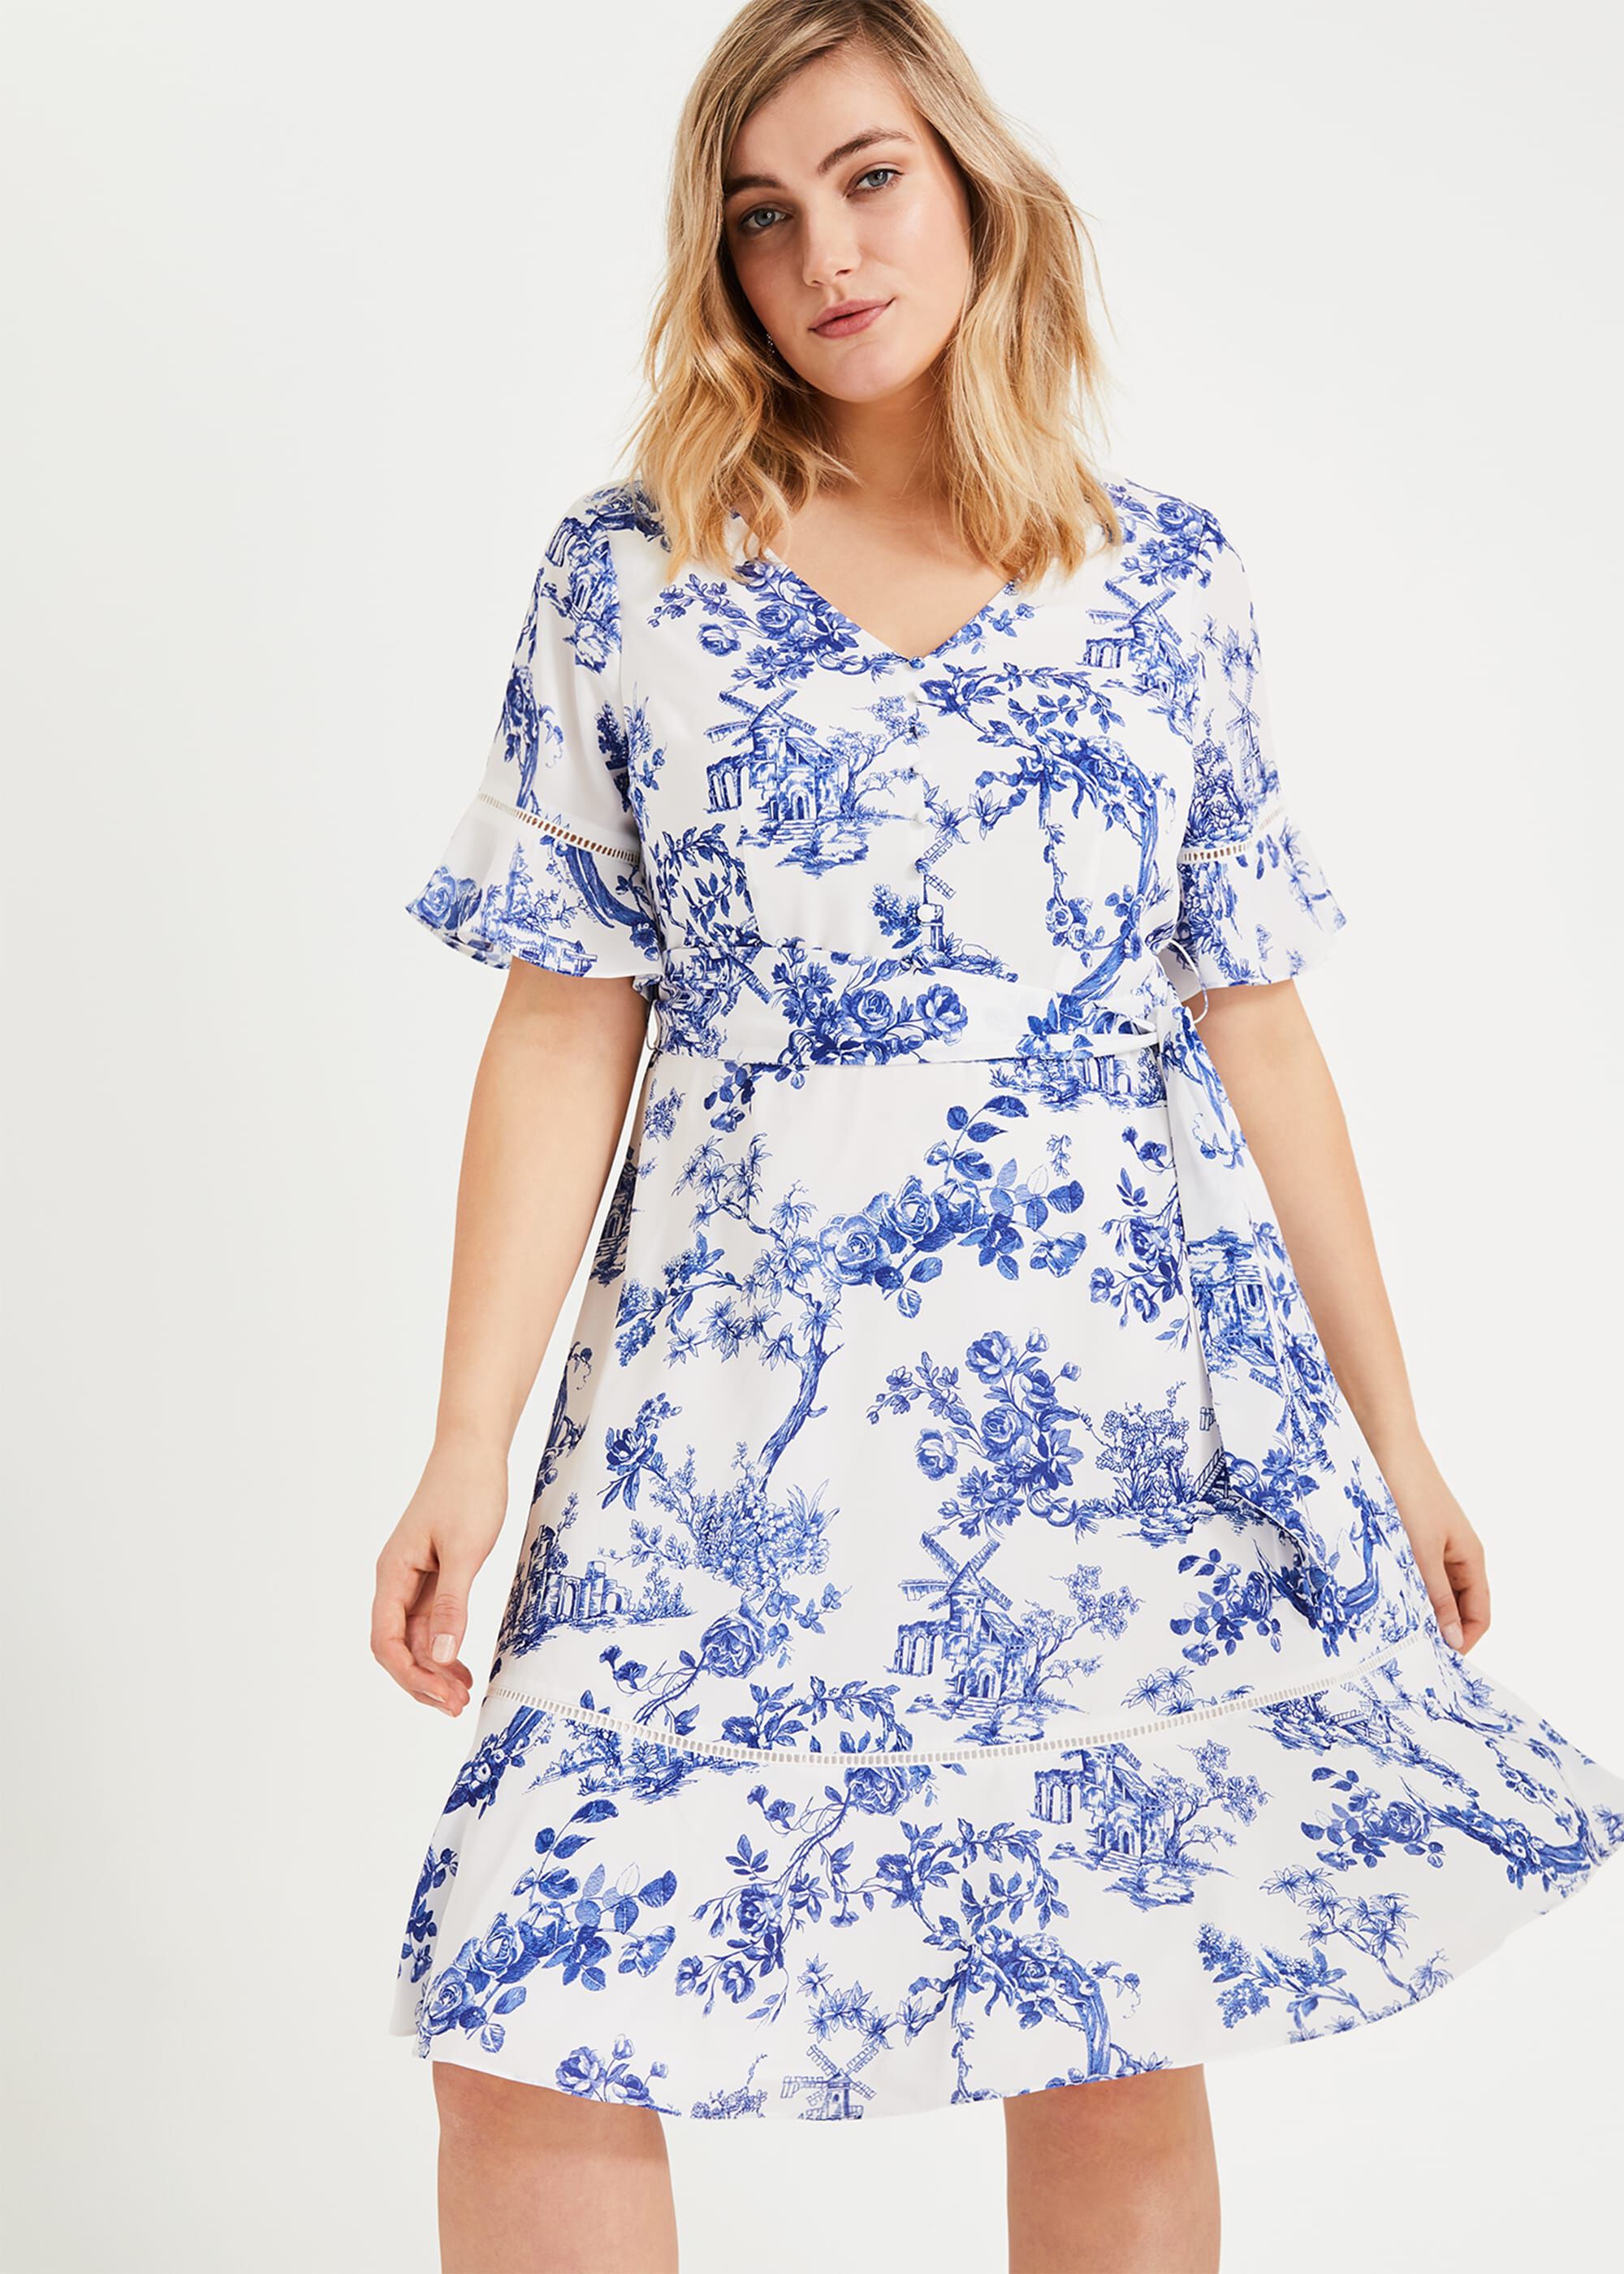 Phase Eight Size 20 Online Sale, UP TO 50% OFF